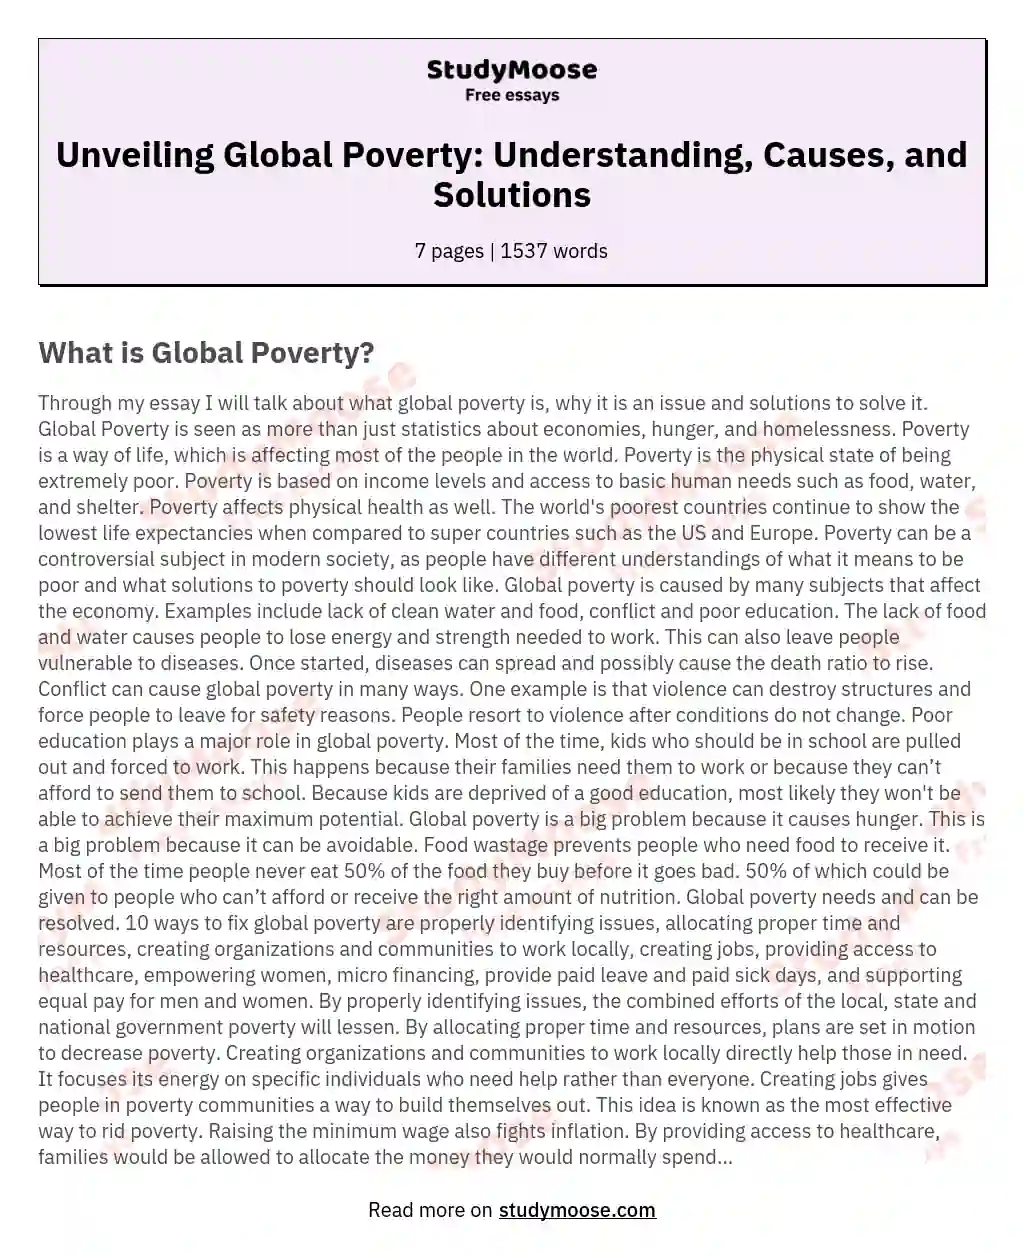 Unveiling Global Poverty: Understanding, Causes, and Solutions essay